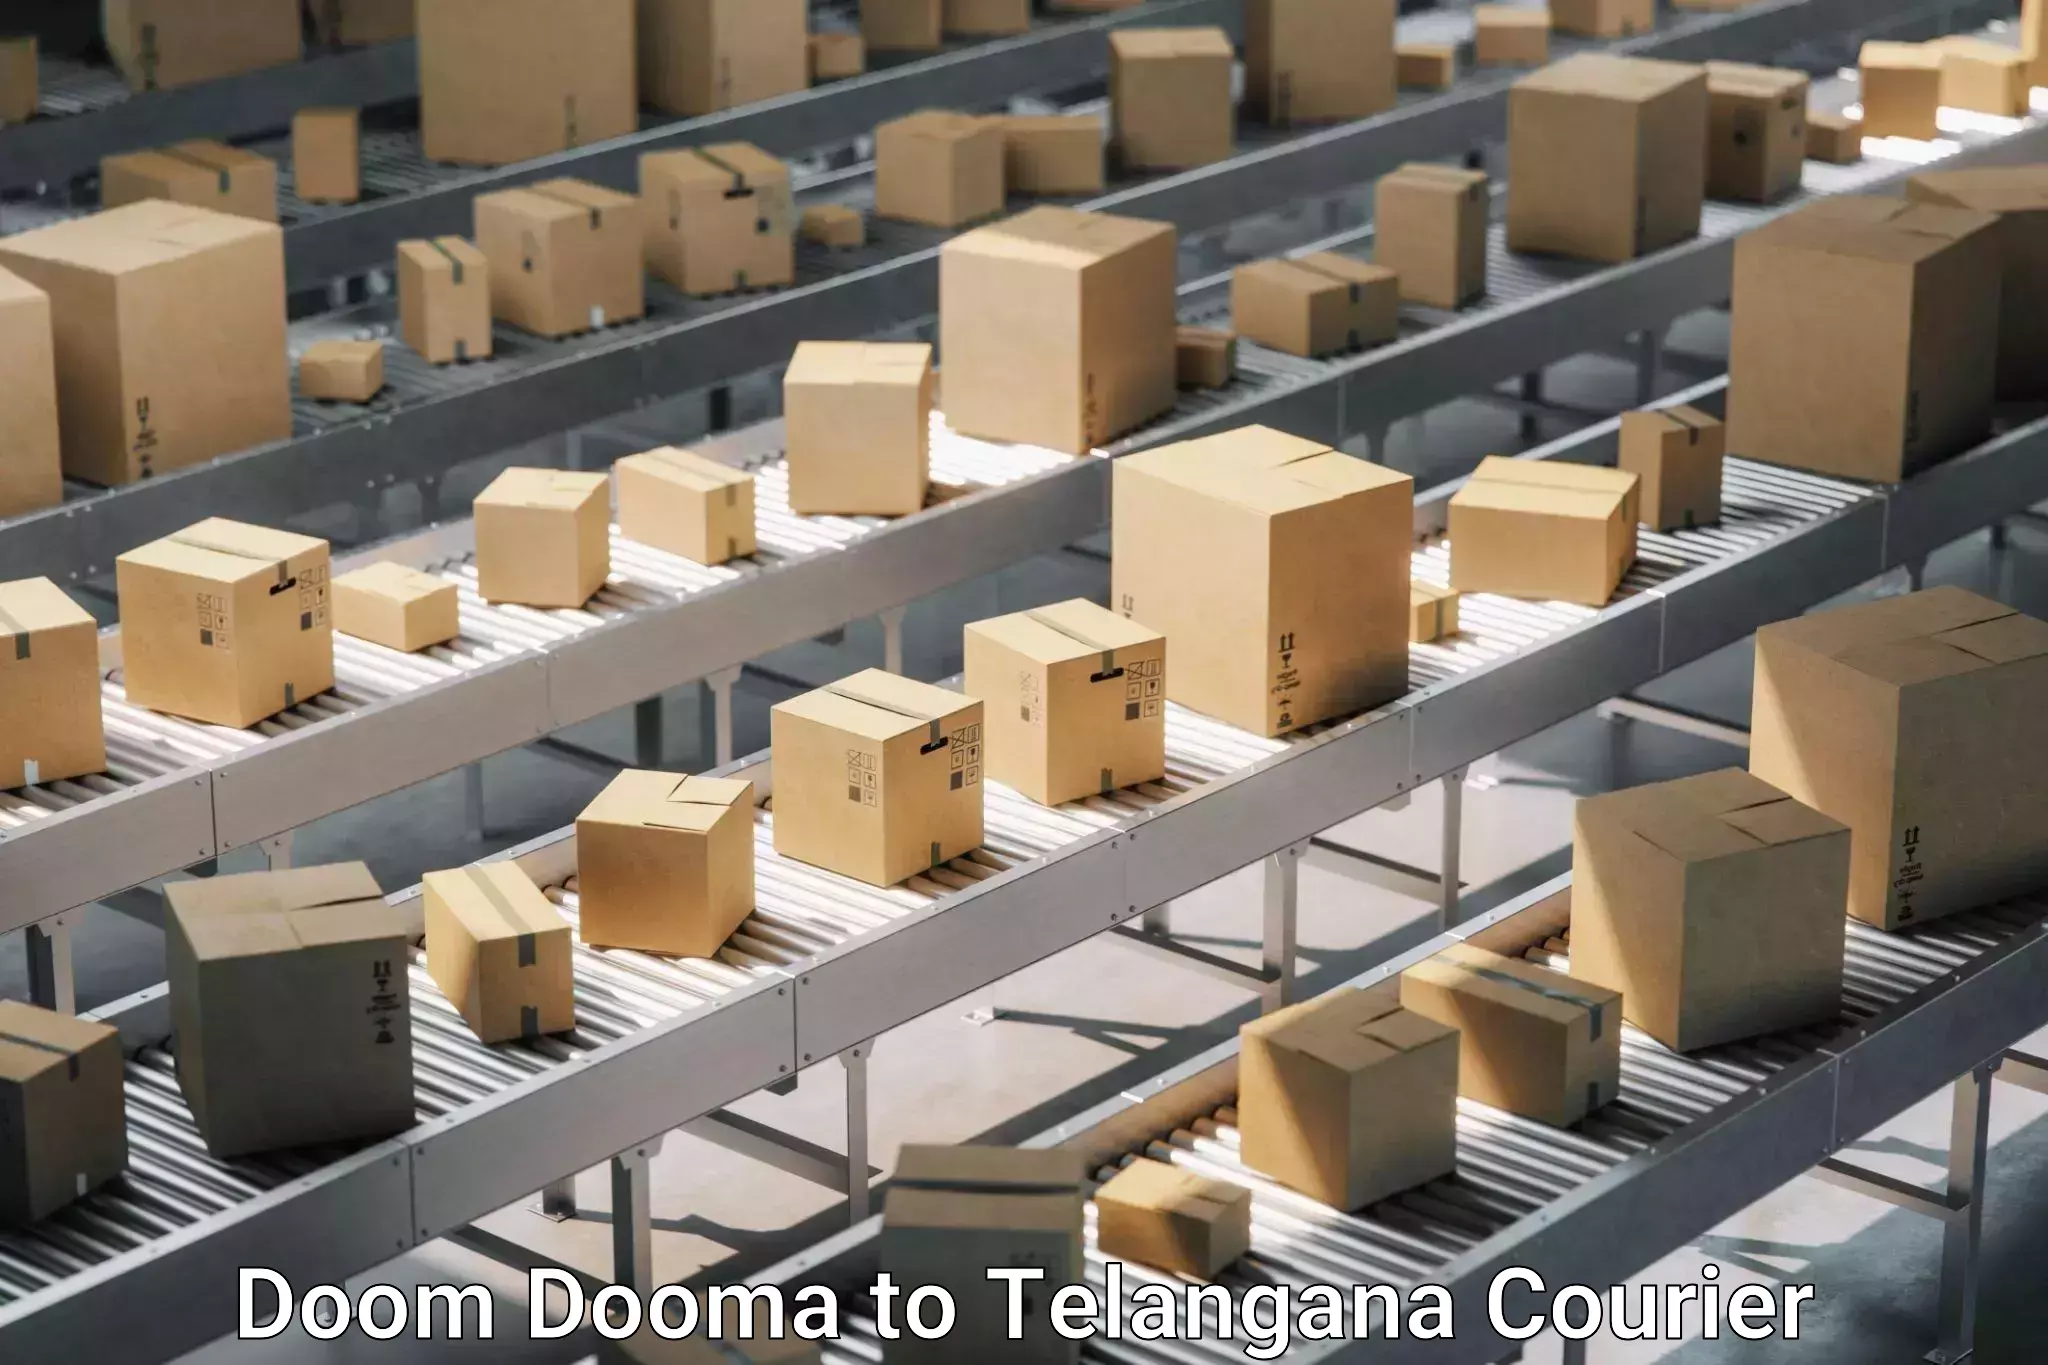 Moving and packing experts Doom Dooma to Metpally